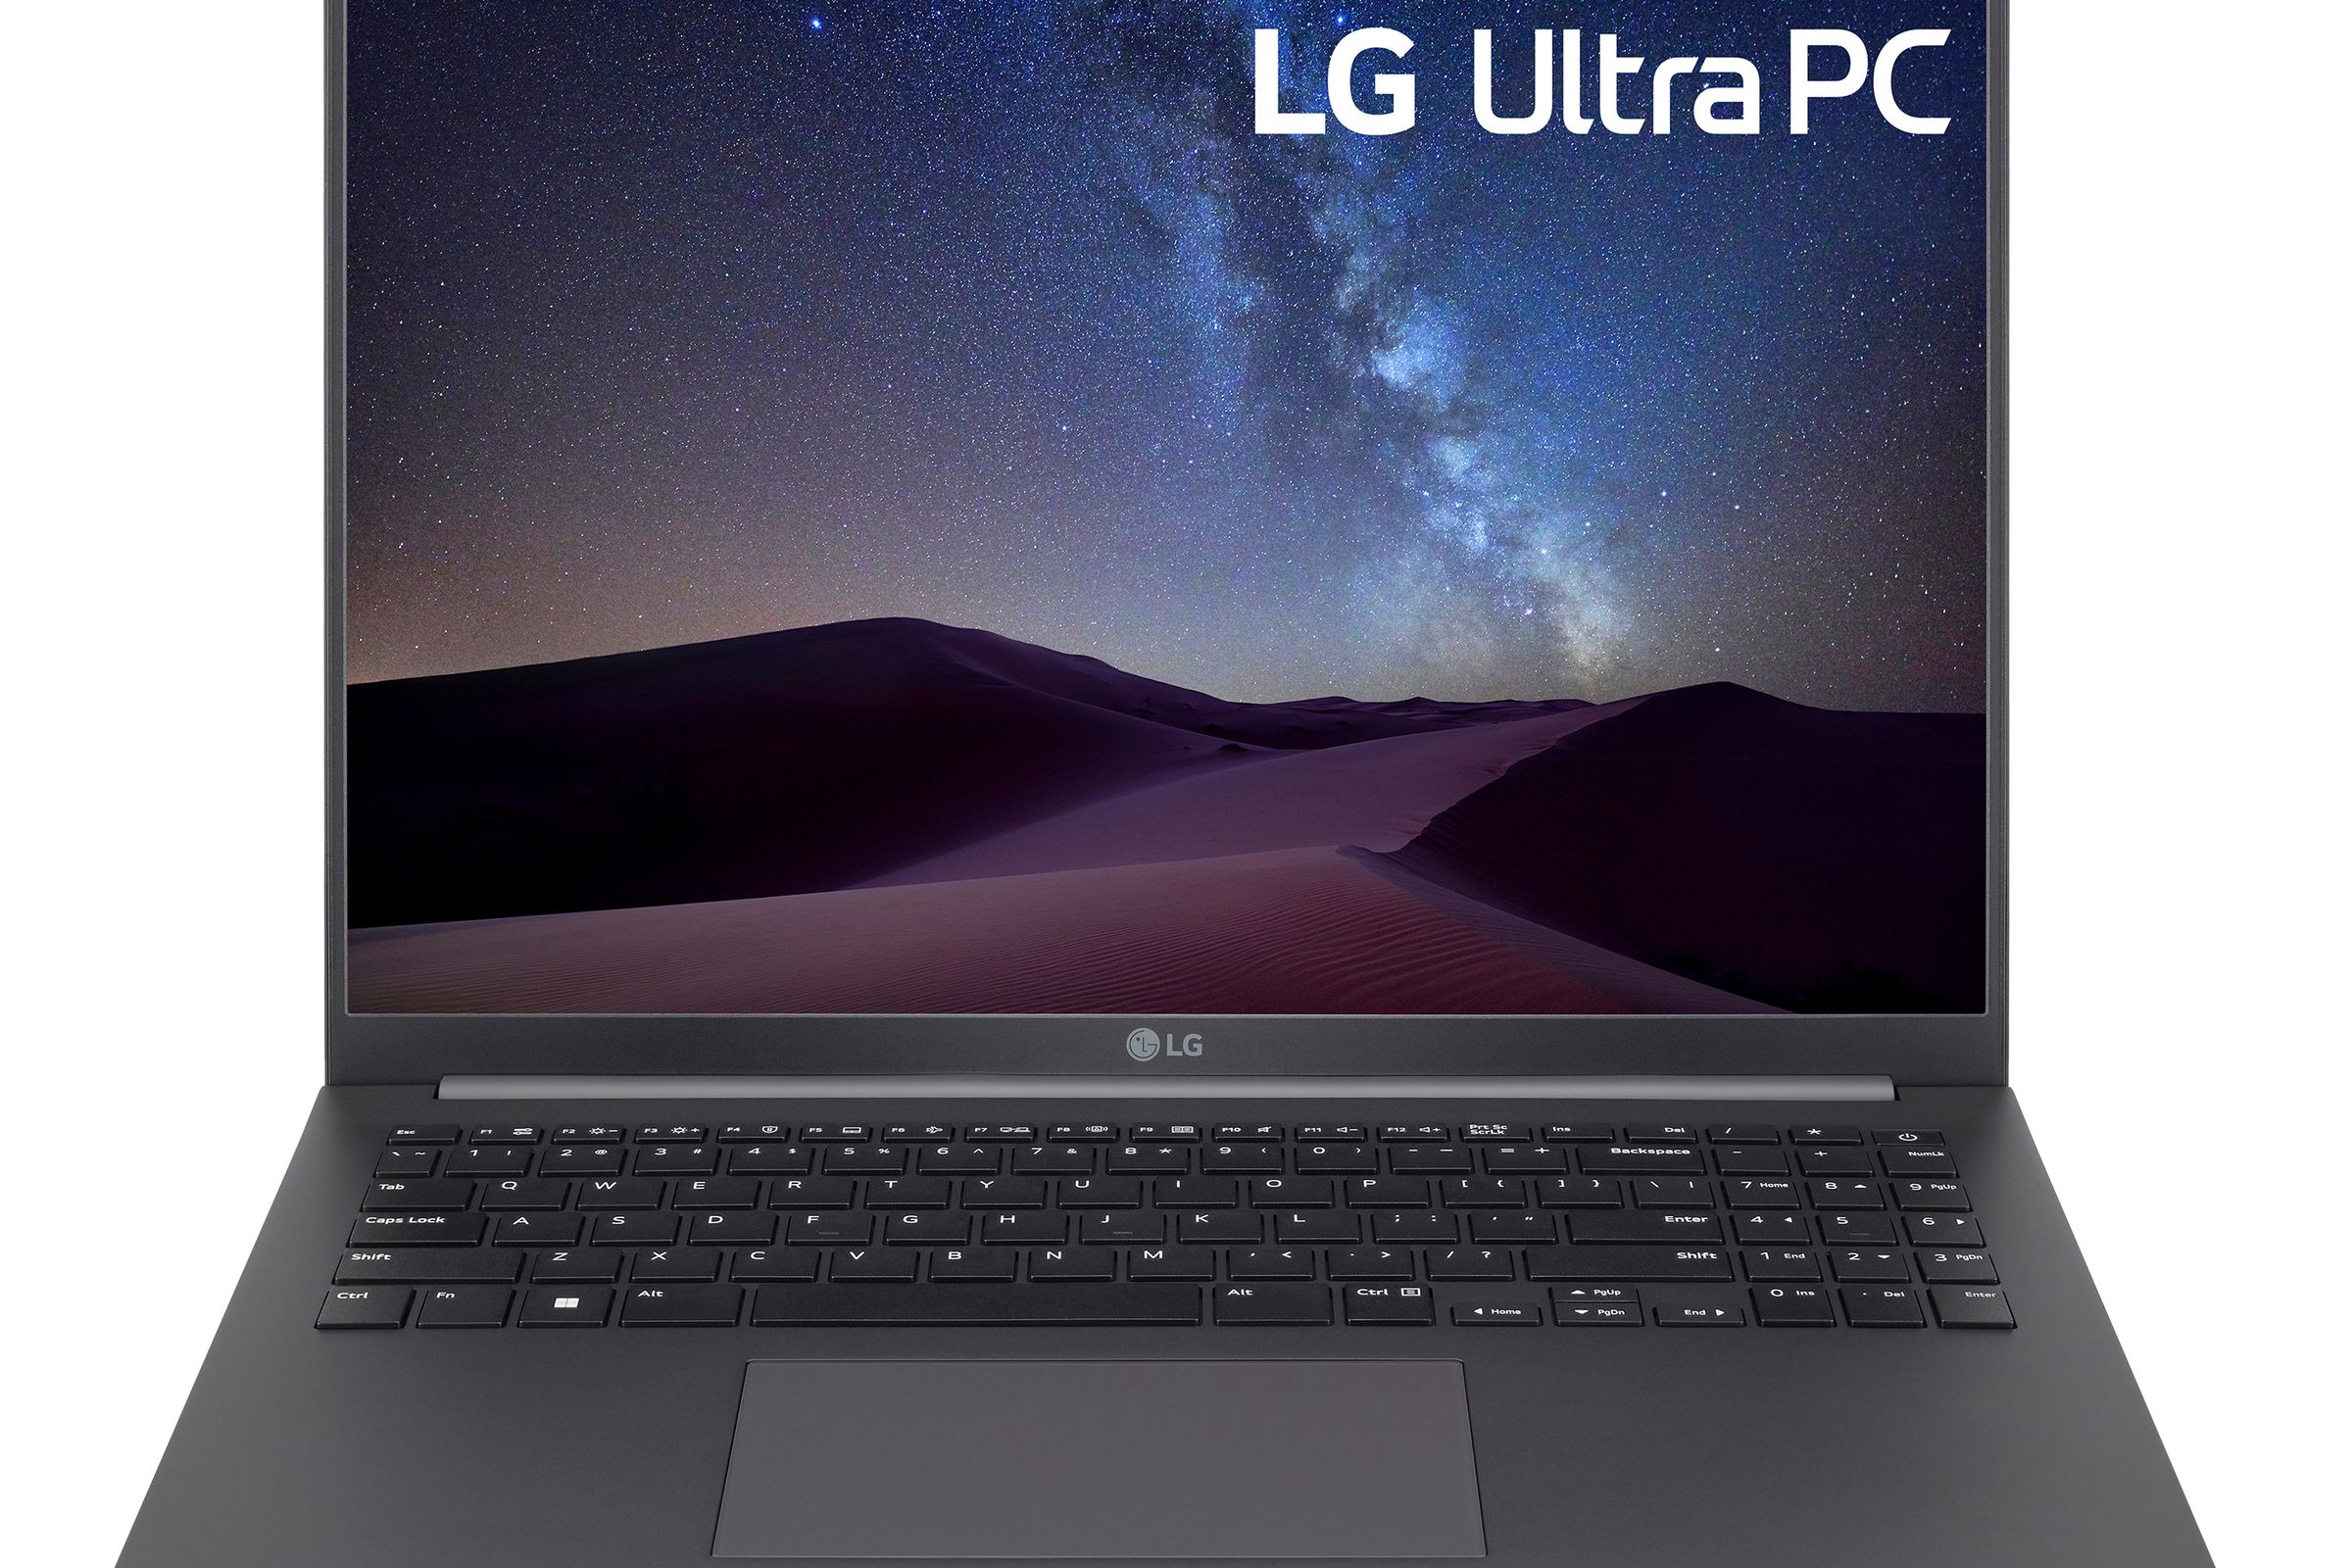 The LG Ultra PC 17 on a white background, open. The screen displays a pastoral night scene with LG Ultra PC printed in the top right corner.